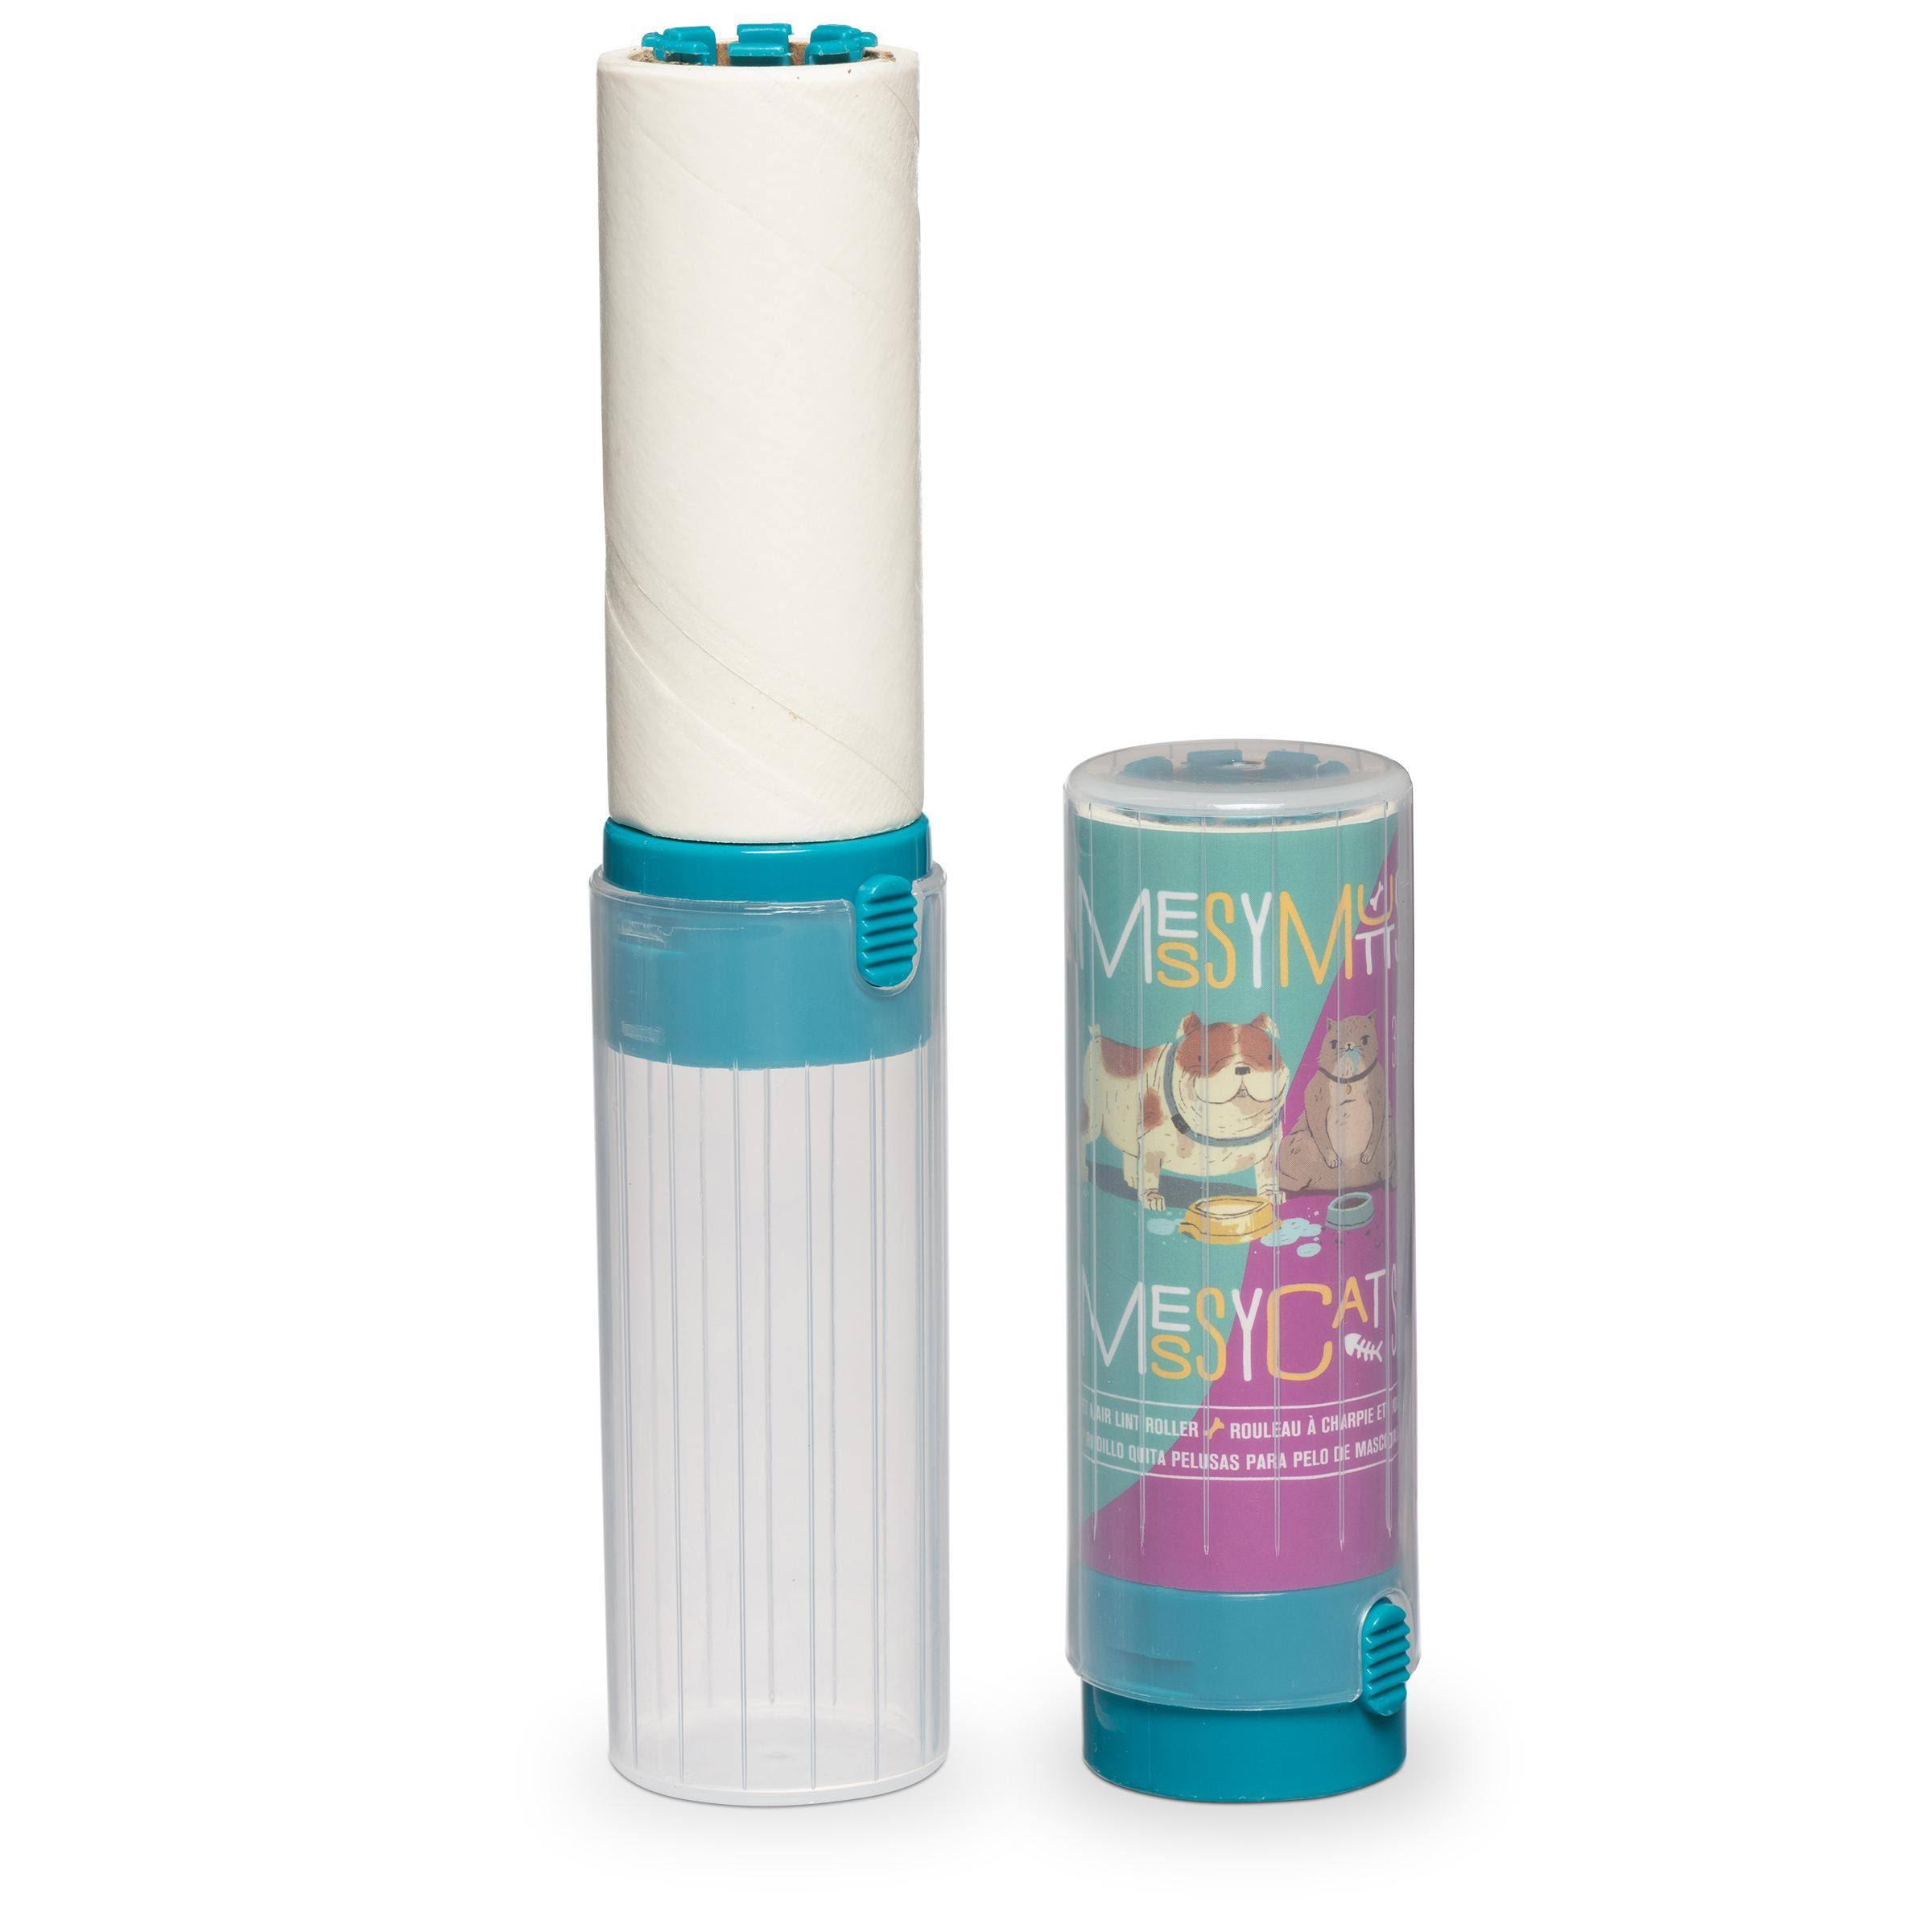 Messy Mutts Travel Pet Hair Lint Roller